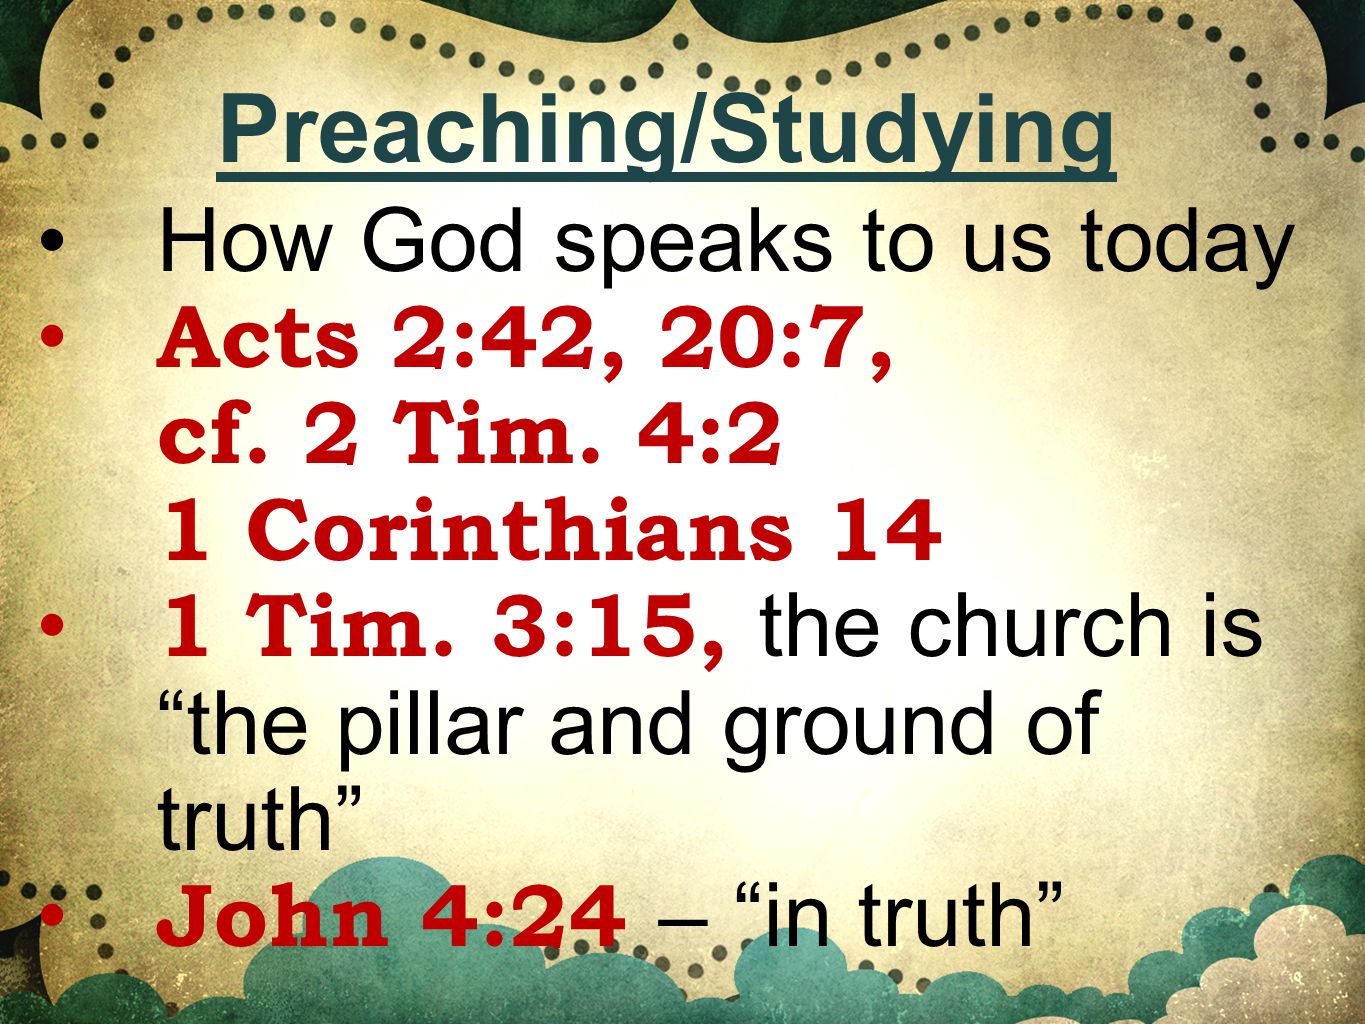 How God speaks to us today Acts 2:42, 20:7, cf. 2 Tim.